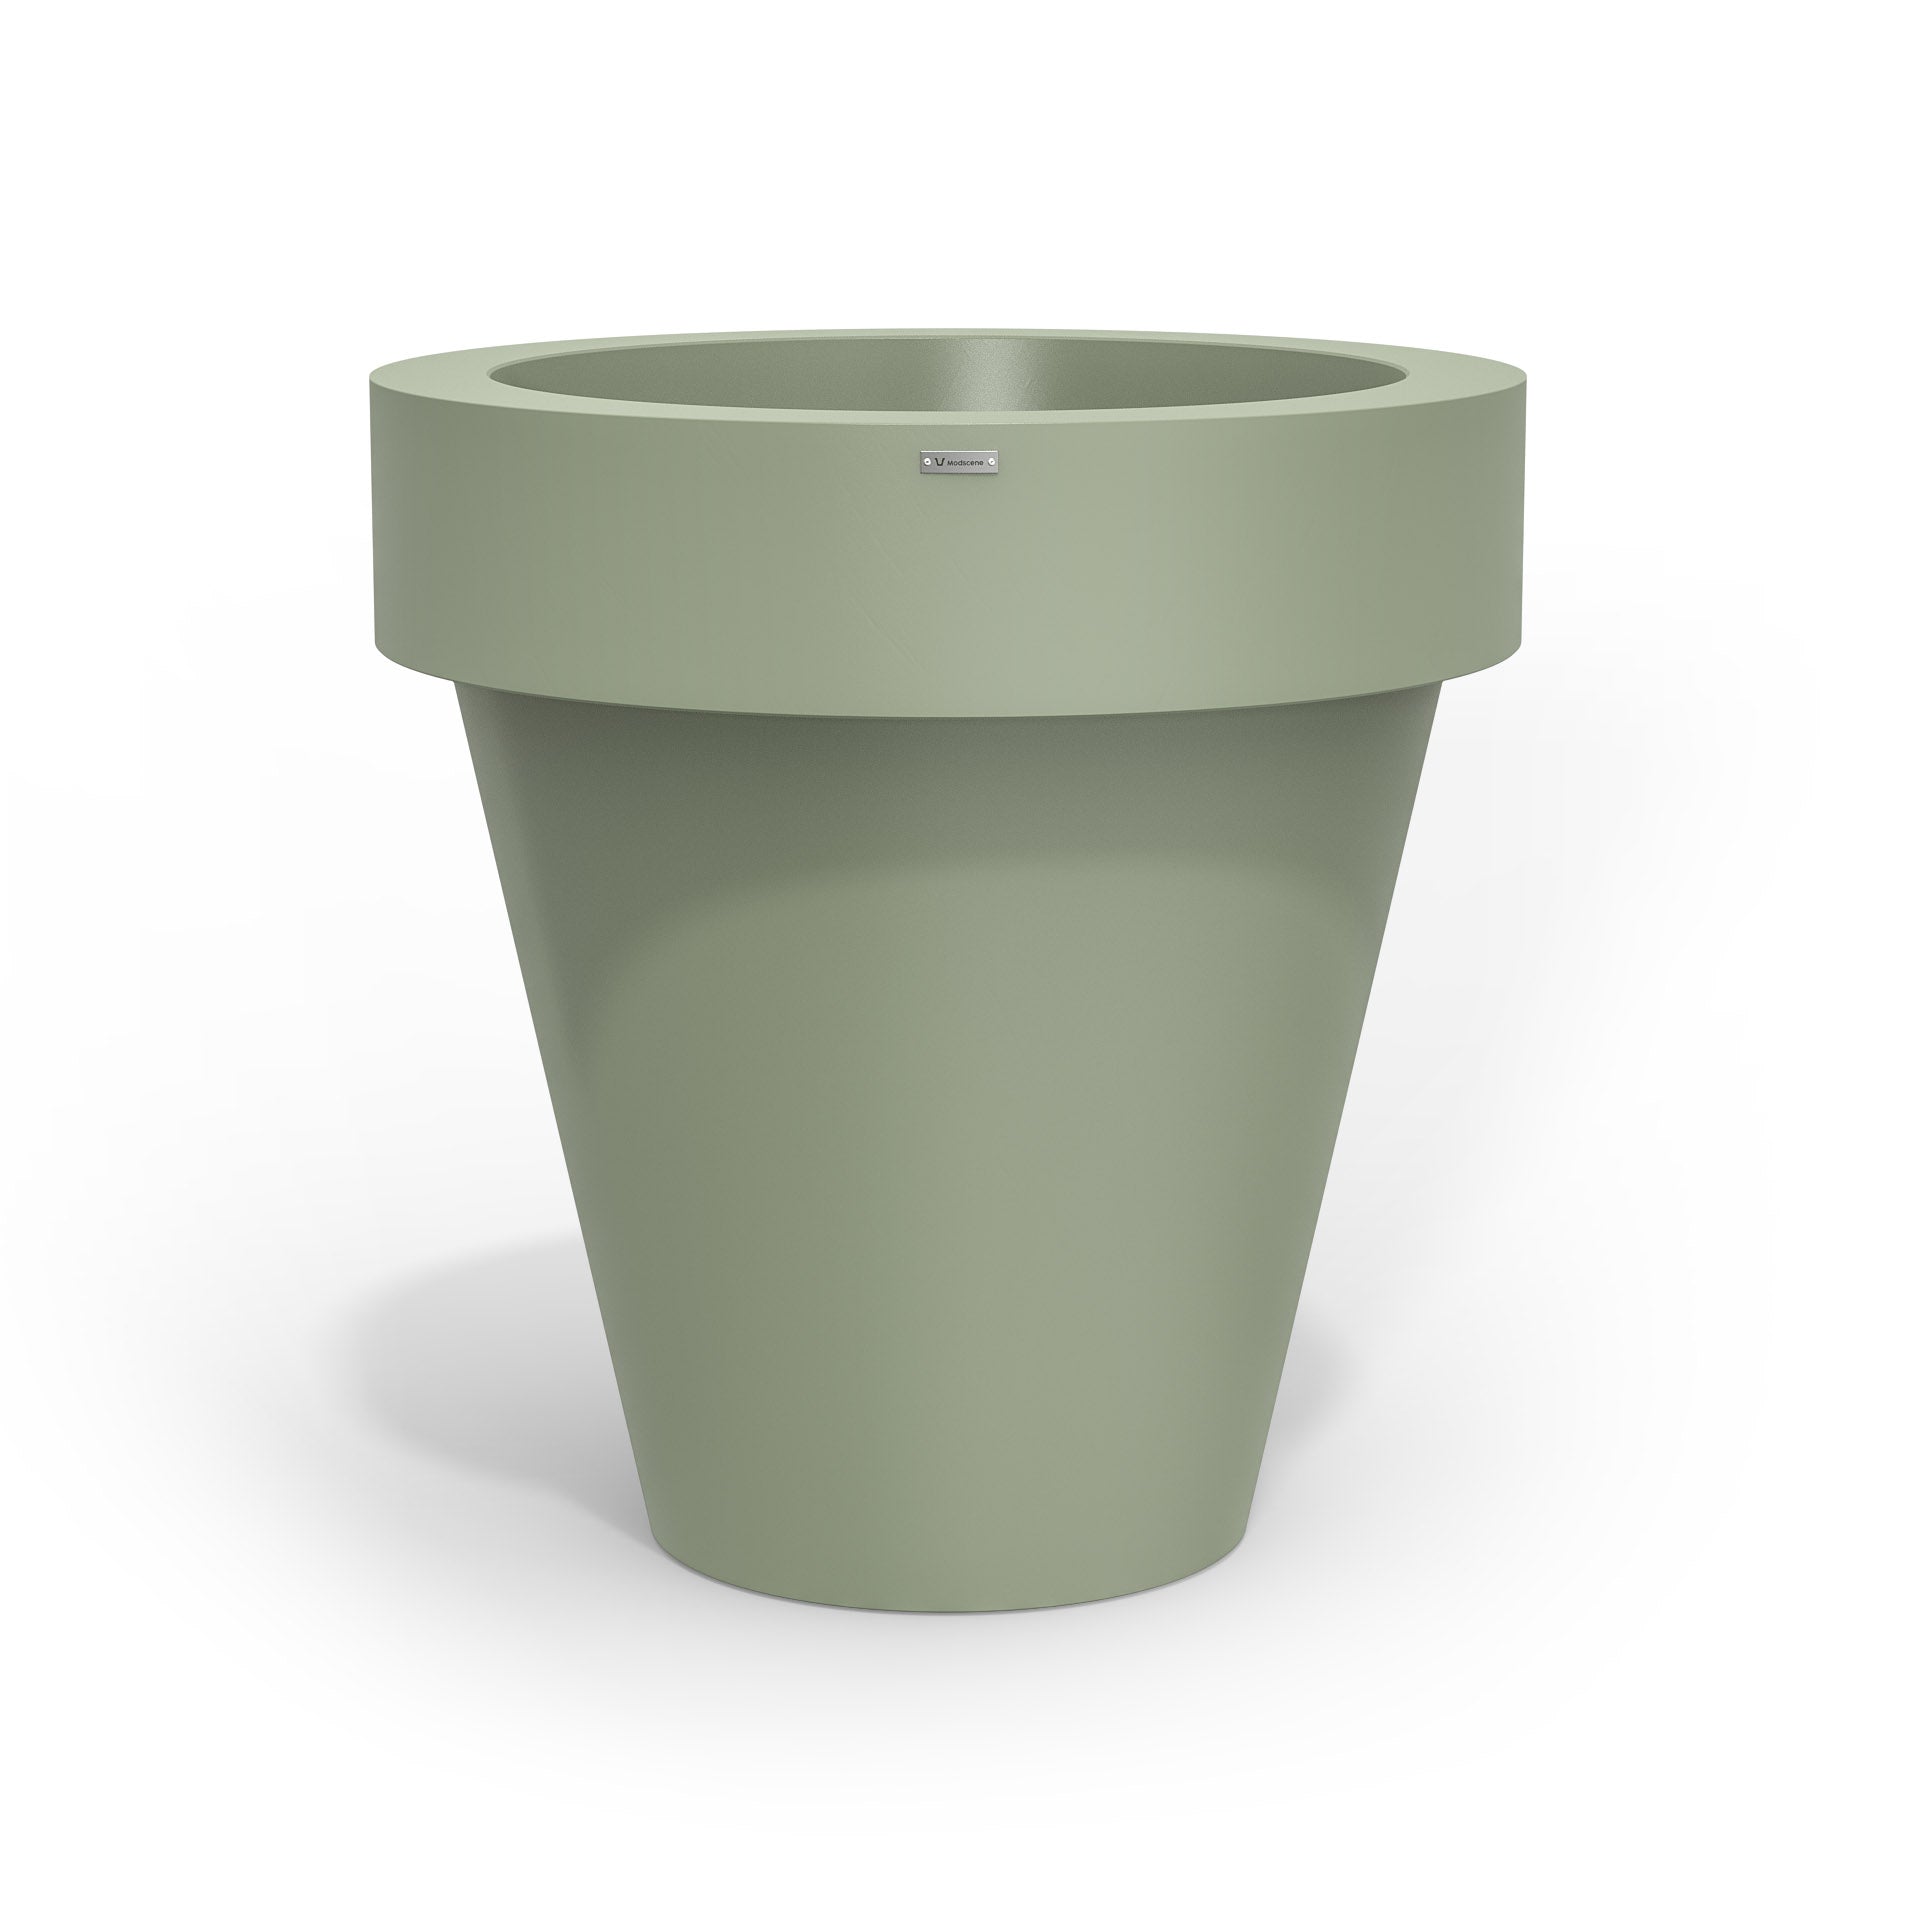 Extra large Modscene planter pot in a pastel green colour.